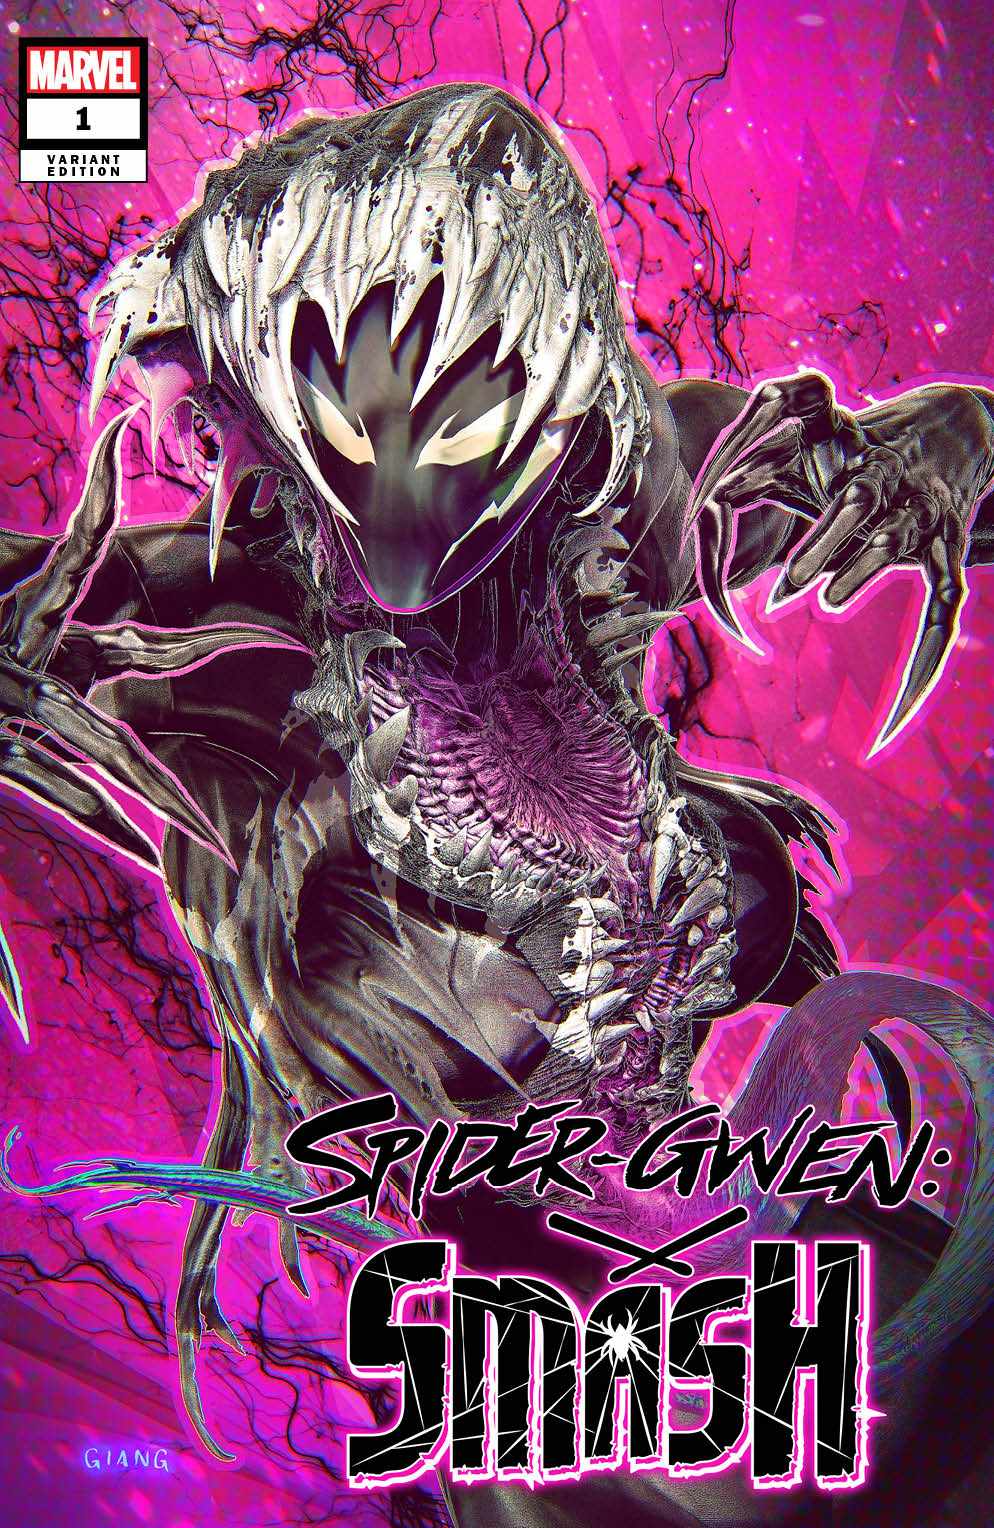 SPIDER-GWEN SMASH #1 JOHN GIANG MEGACON EXCLUSIVE VENOMIZED VARIANT COVERS OPTIONS